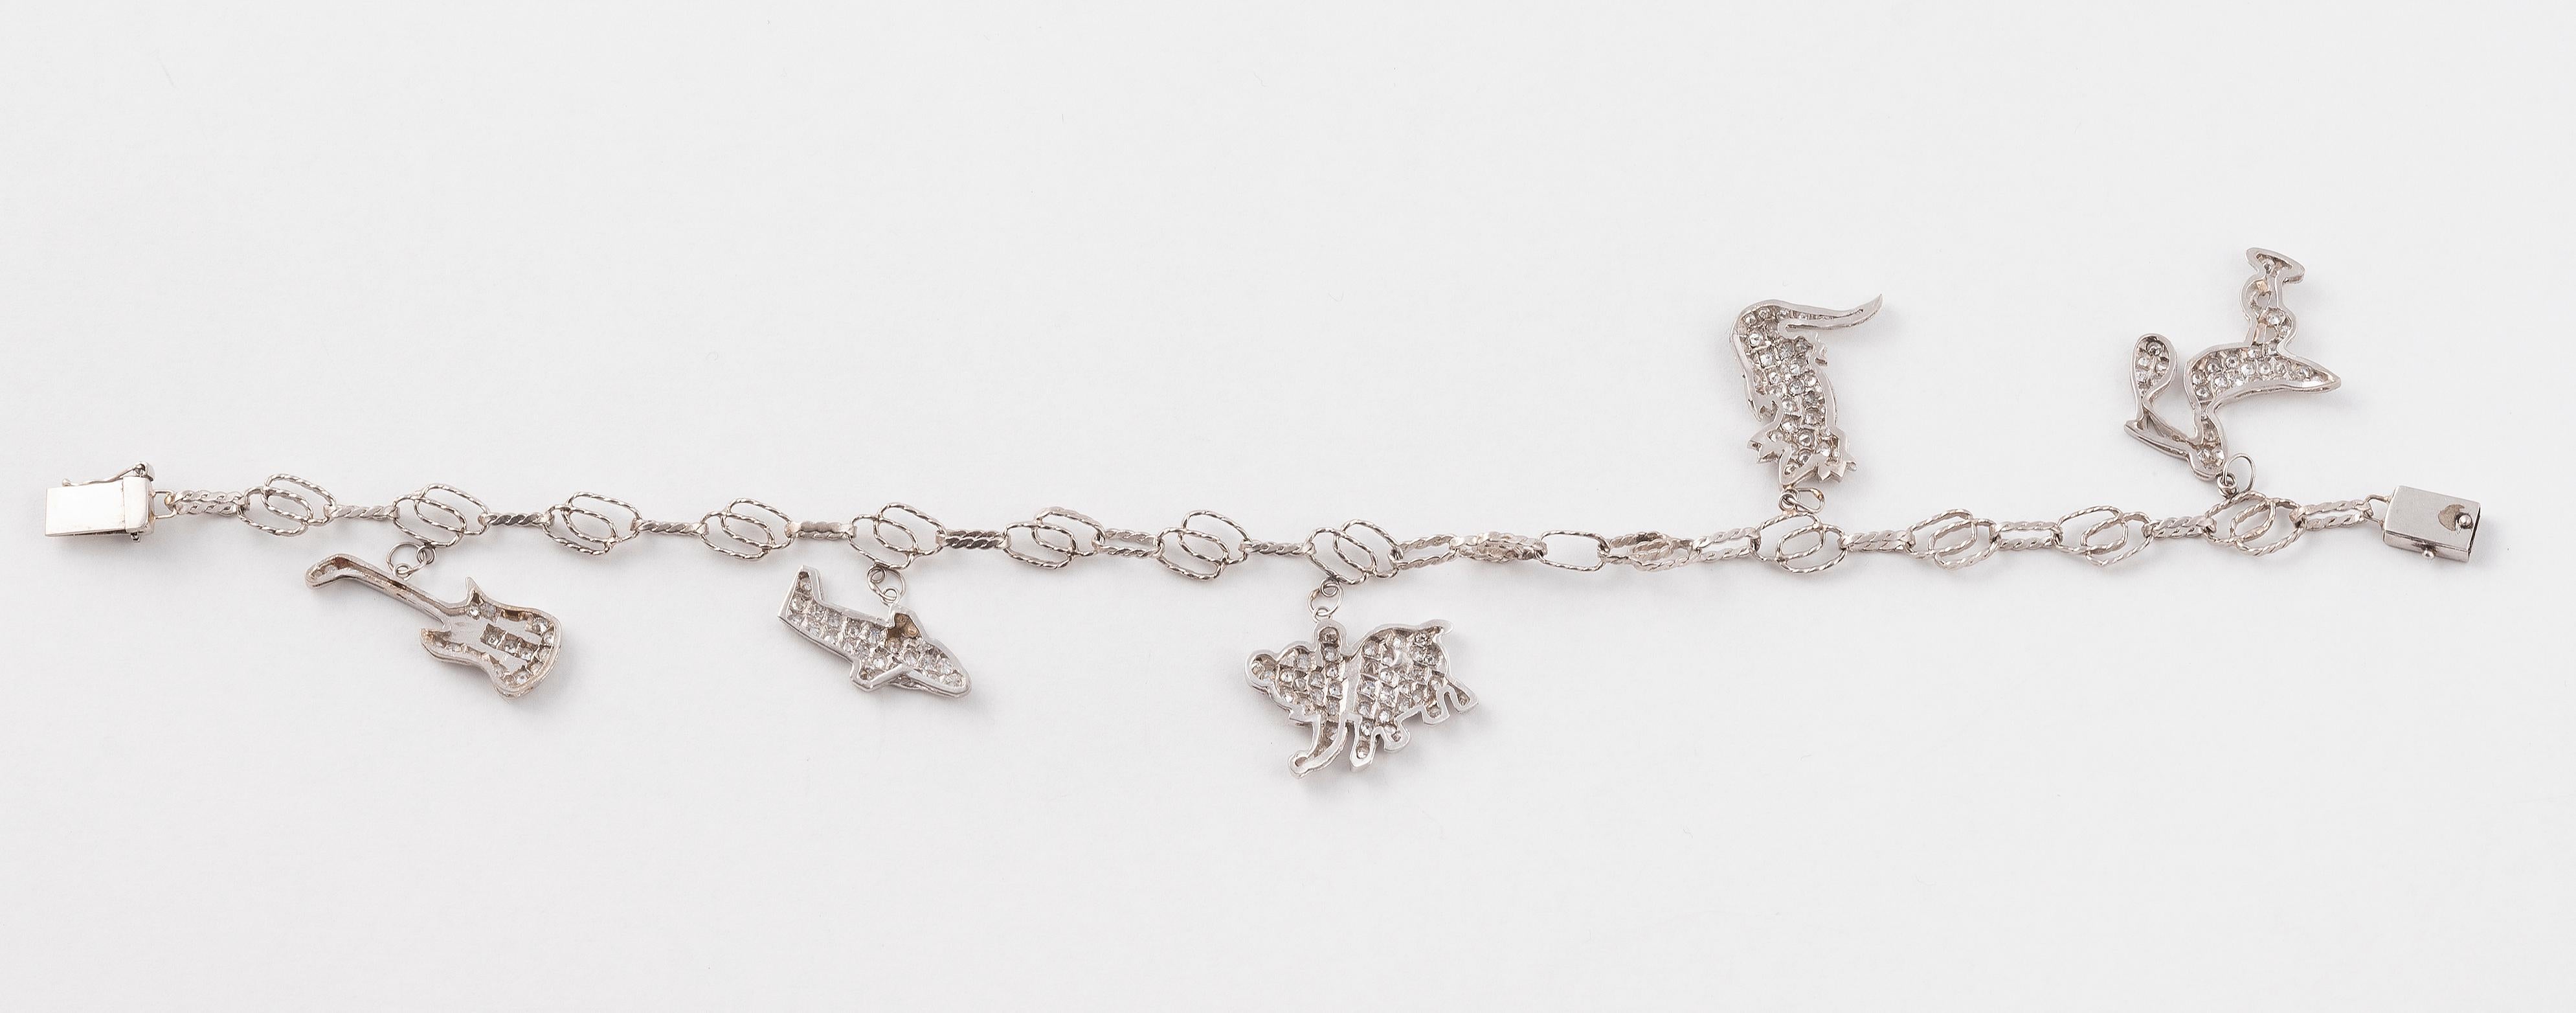 The open-link chain supporting five millegrain diamond set charms depicting various animals and a guitar.
Mounted in Platinum
Length: 18 cm 

Weight: 16 gr